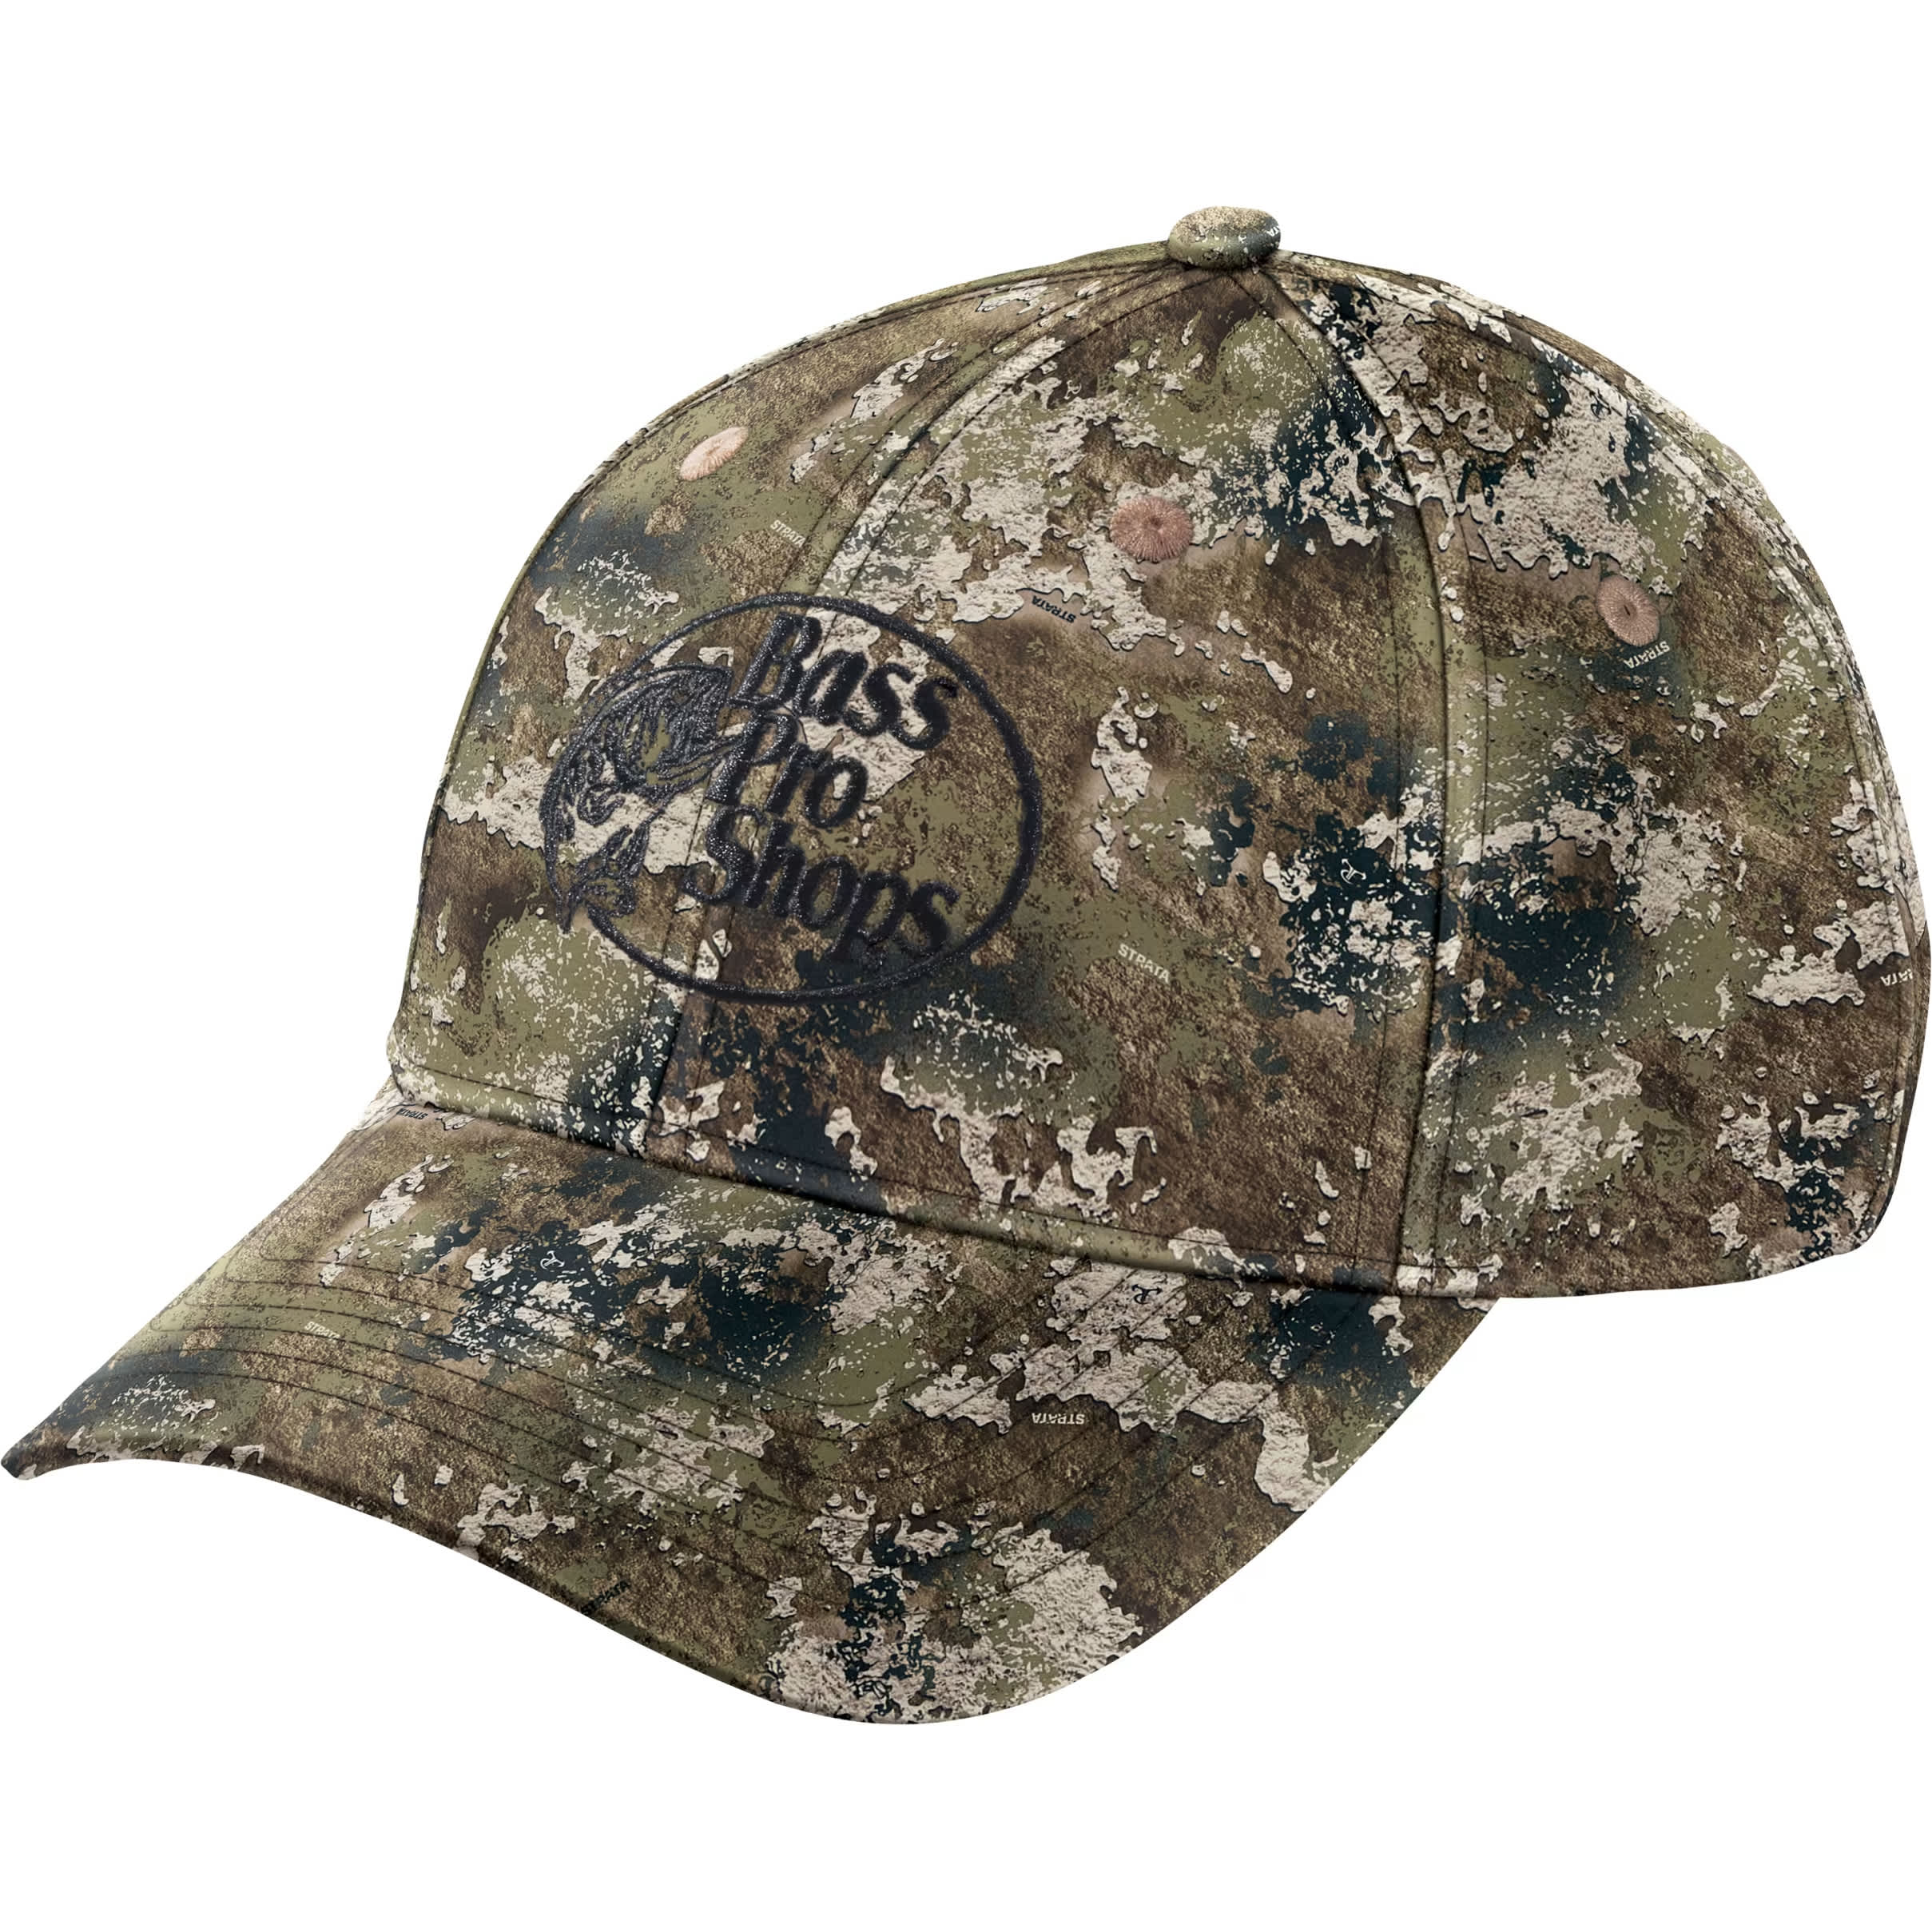 Bass Pro Shops Embroidered Hats for Women